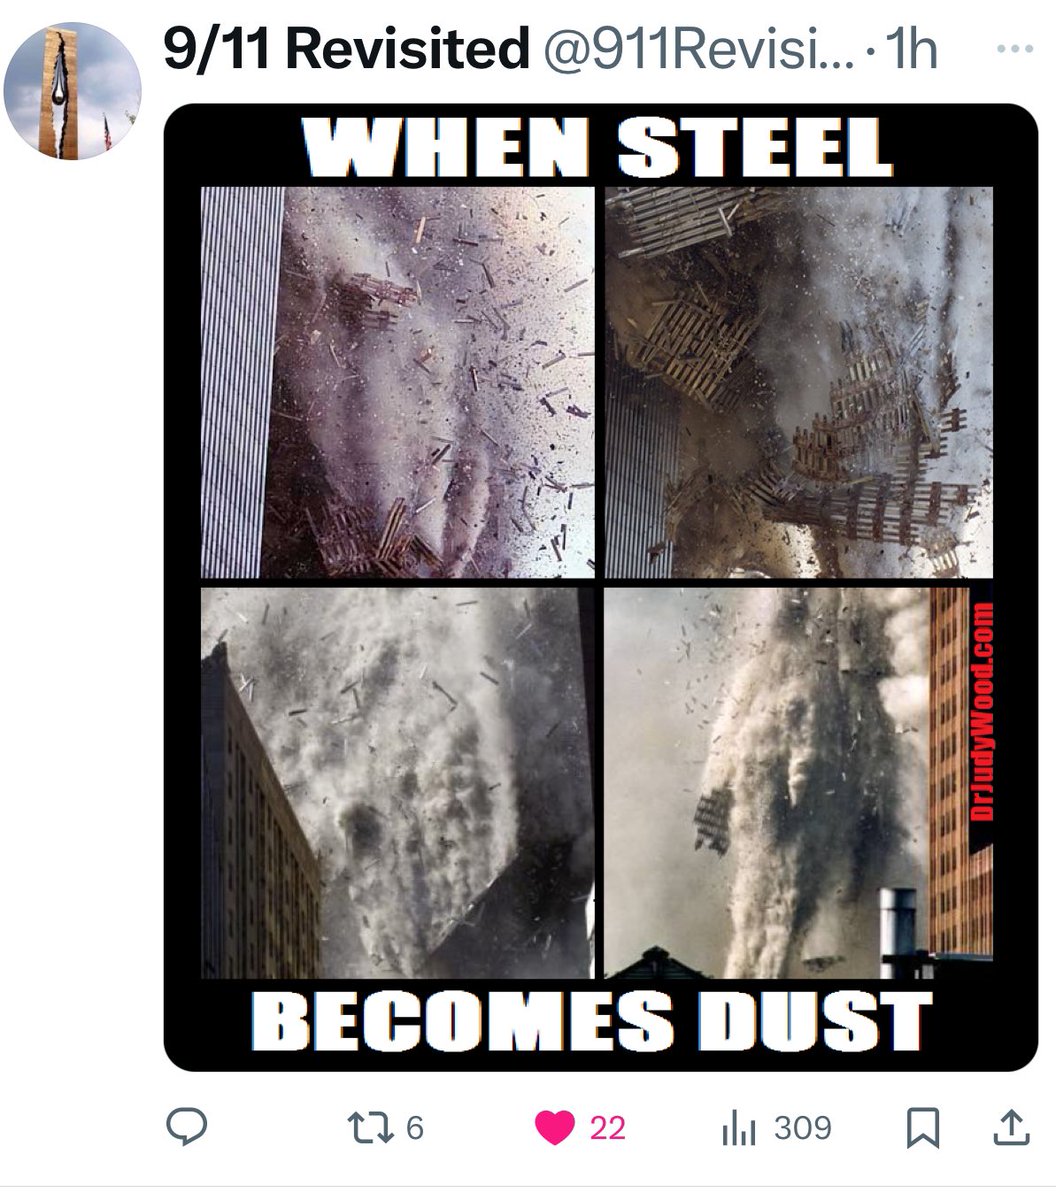 8,277 days later scientist r still trying to figure out how still can steel  become  dust with minutes. 

@911Revisionist #911 #twintowers #worldtradecenter